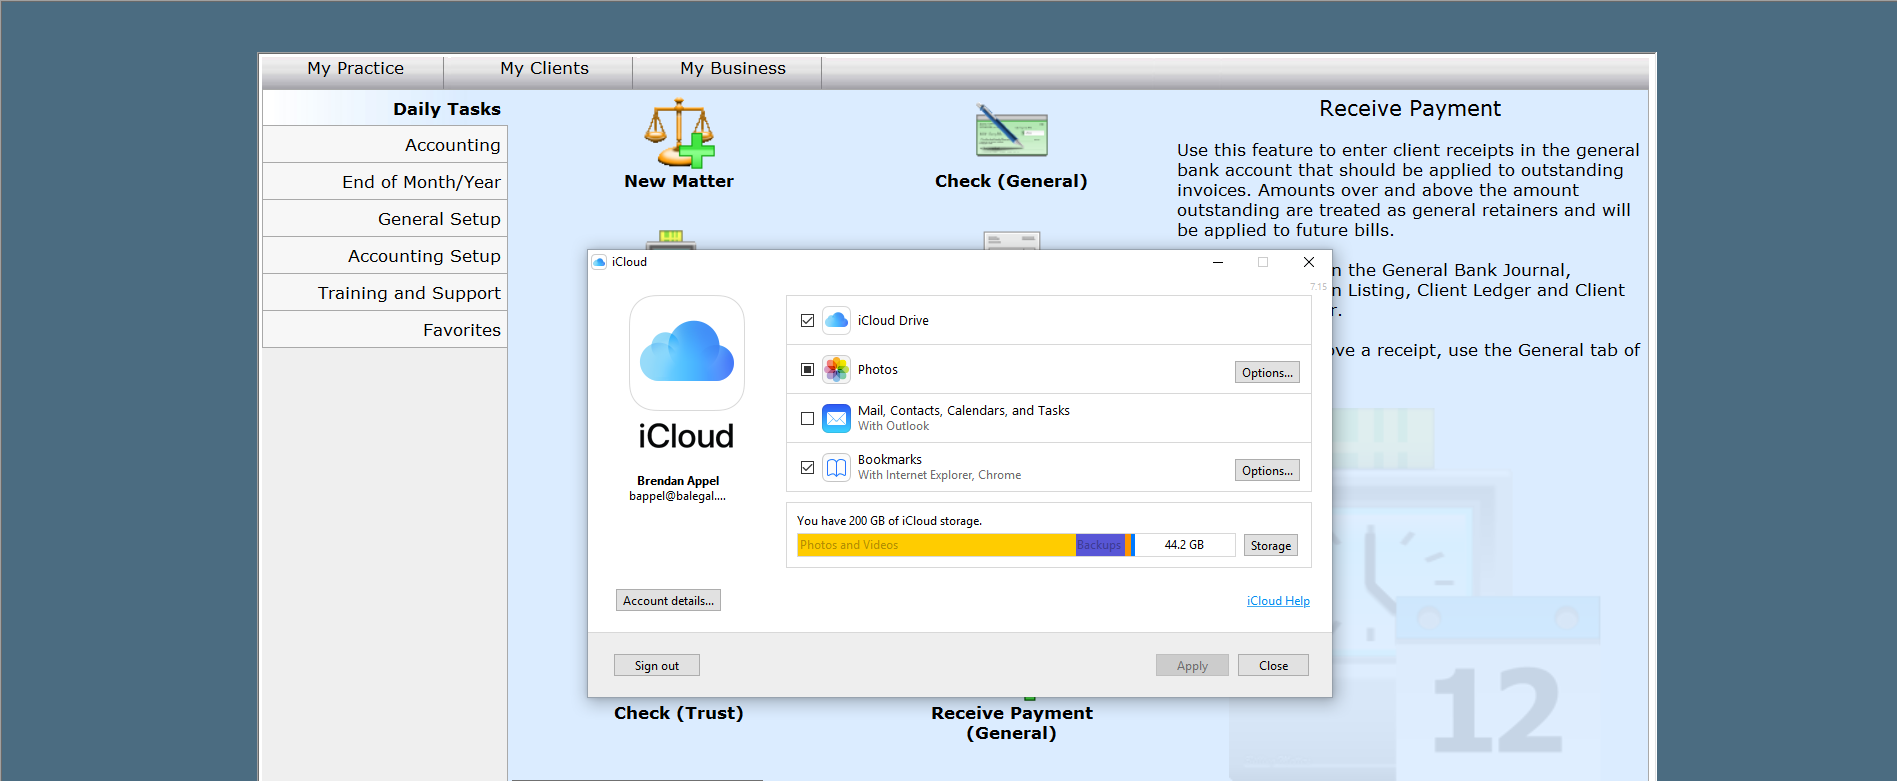 iCloud control panel popping up - Apple